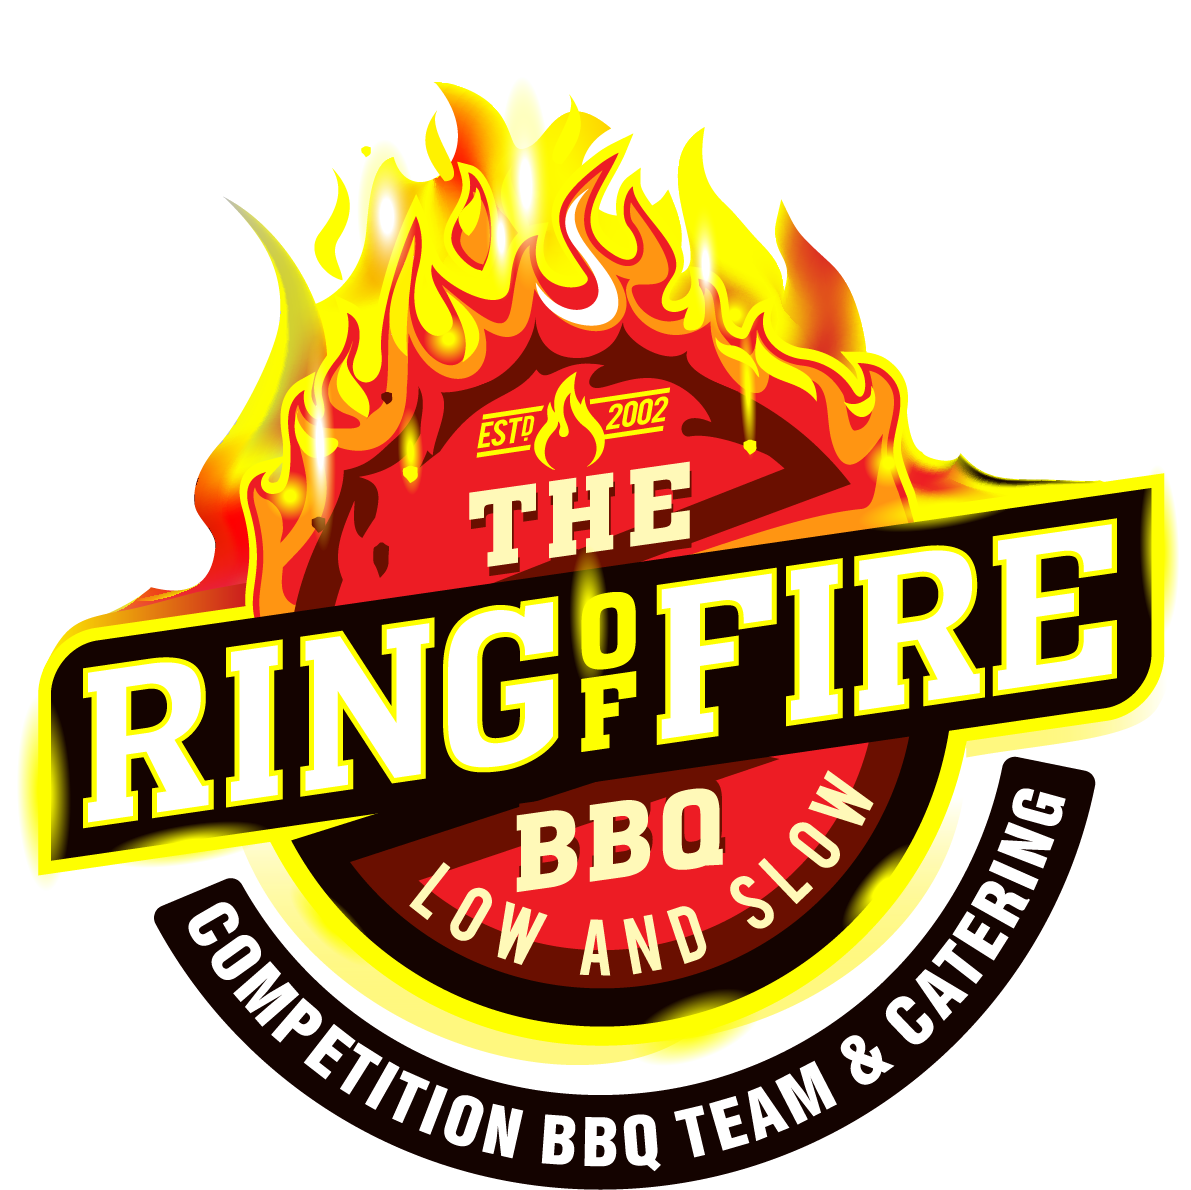 The Ring of Fire Bbq